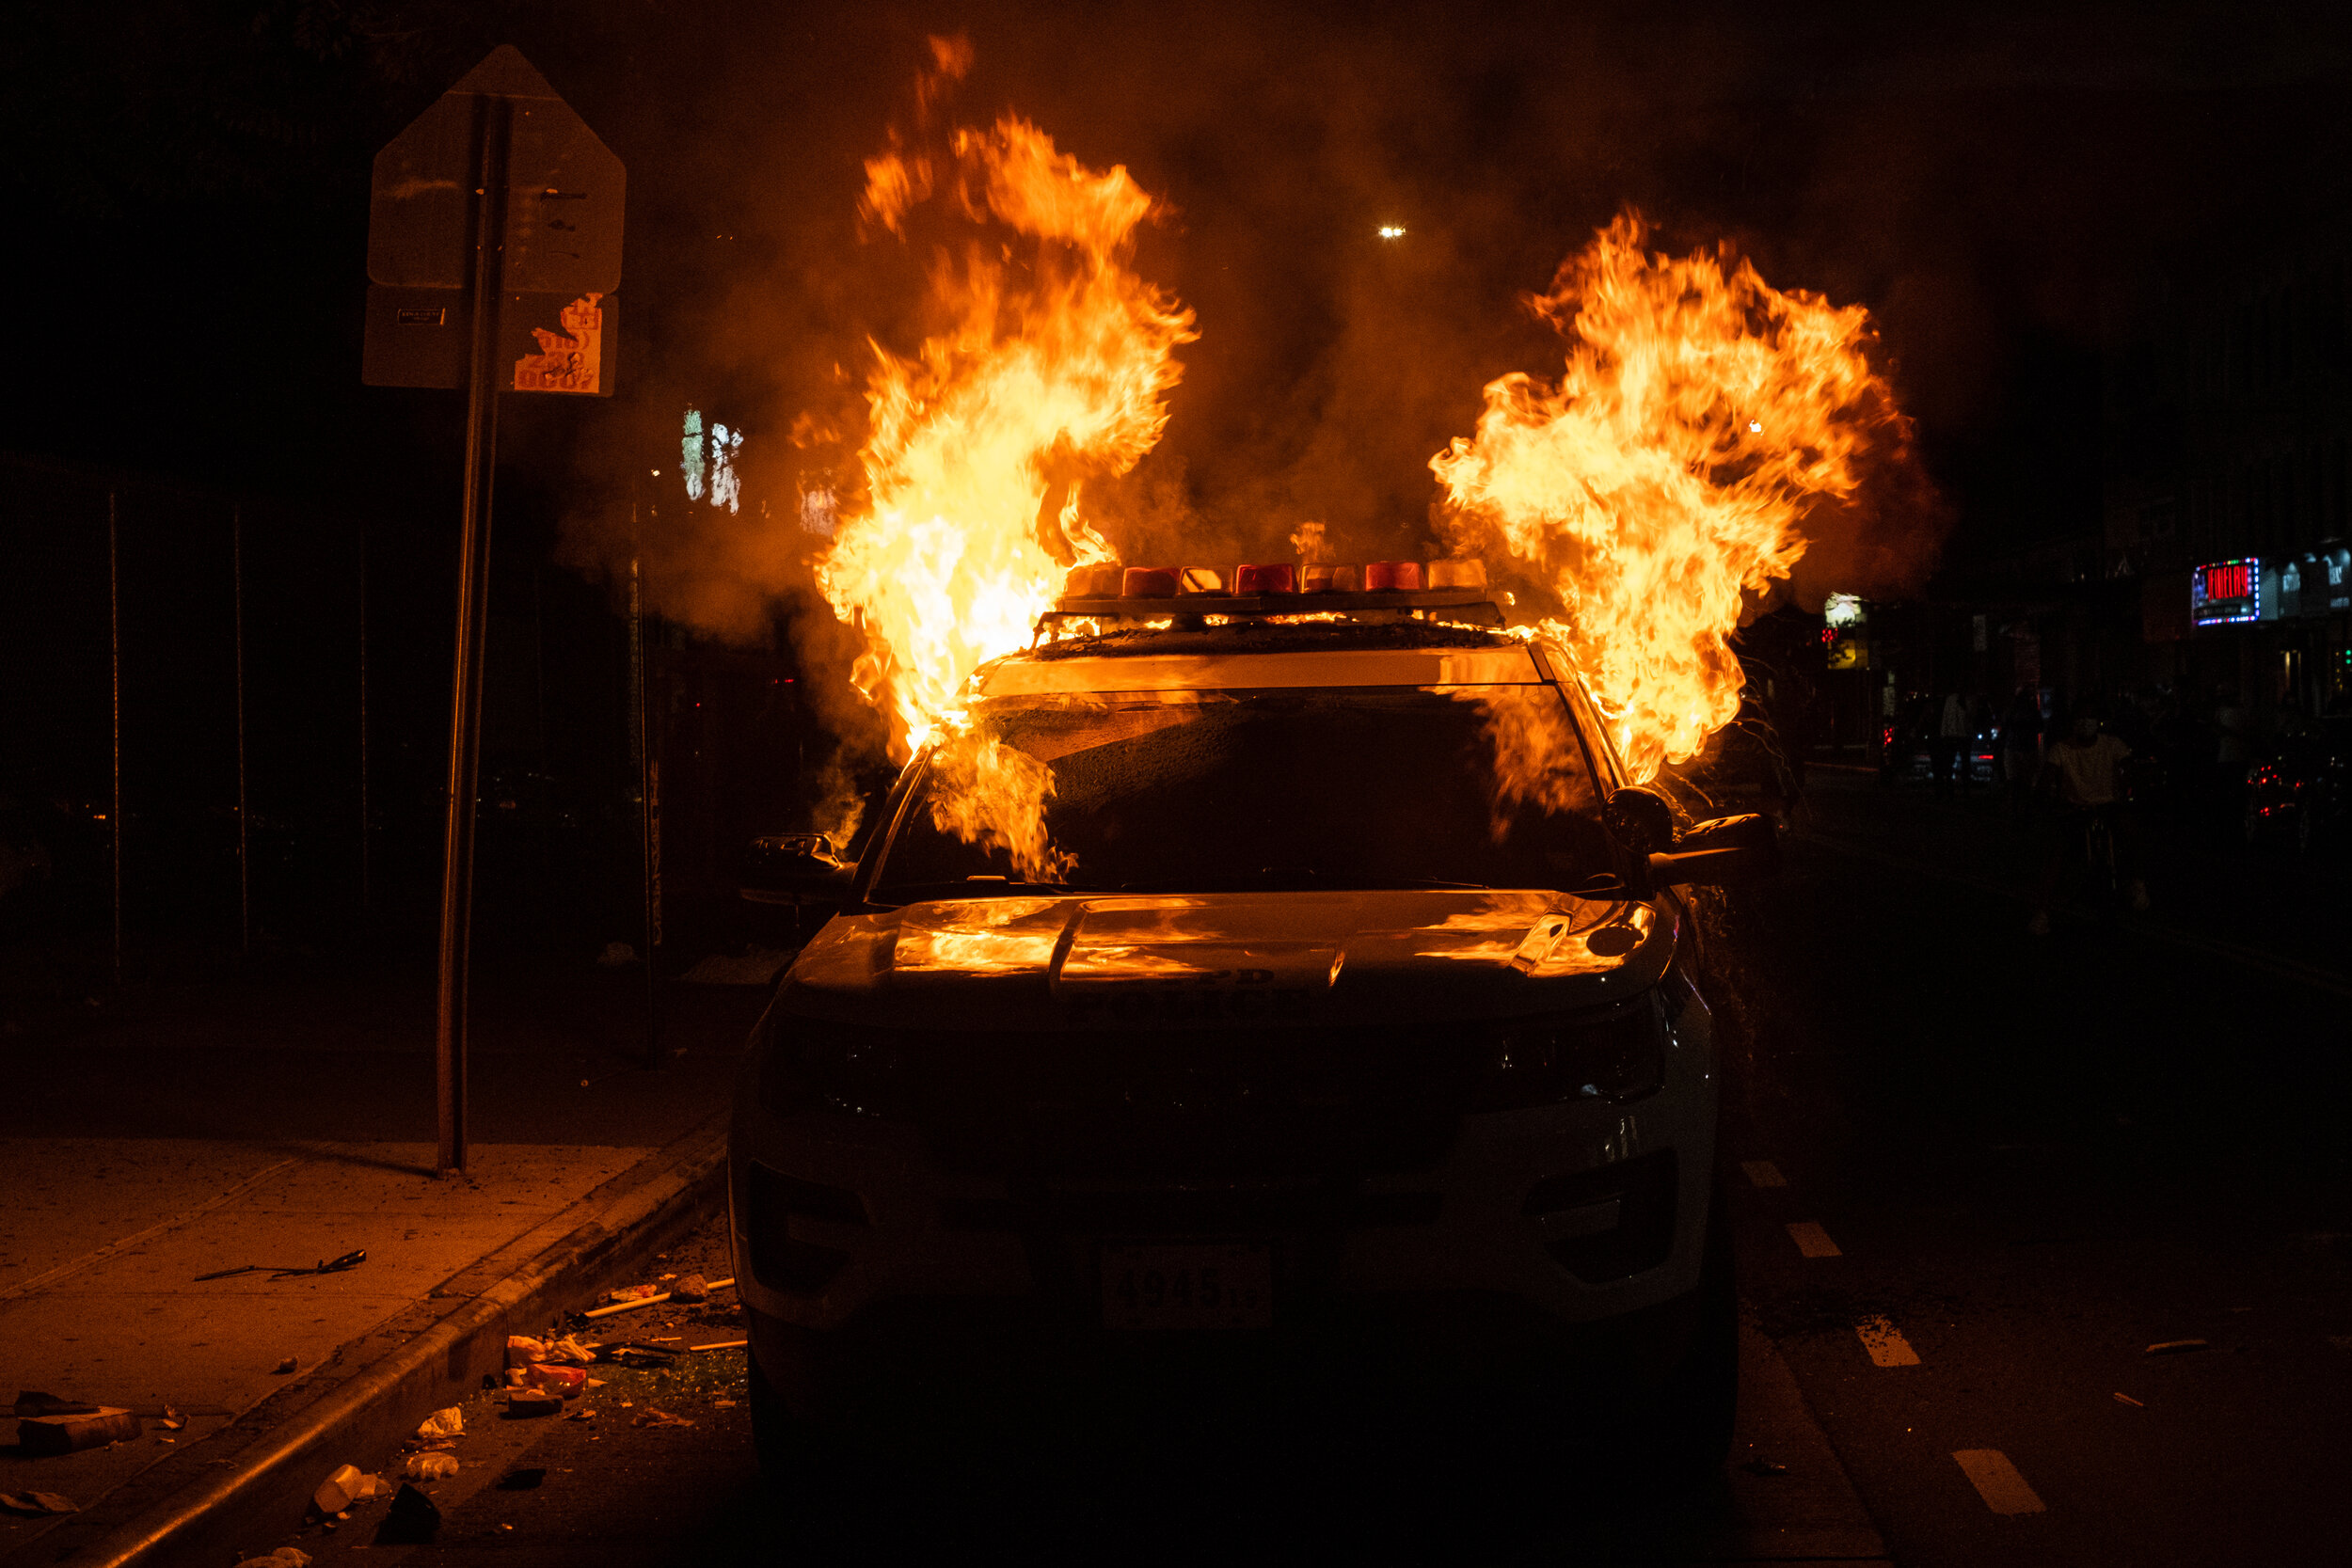  May 30, 2020: New York, NY -   A NYPD vehicle is set on fire as protesters clash with NYPD officers in Flatbush, Brooklyn after George Floyd was killed while being detained by Minneapolis police on May 25.  